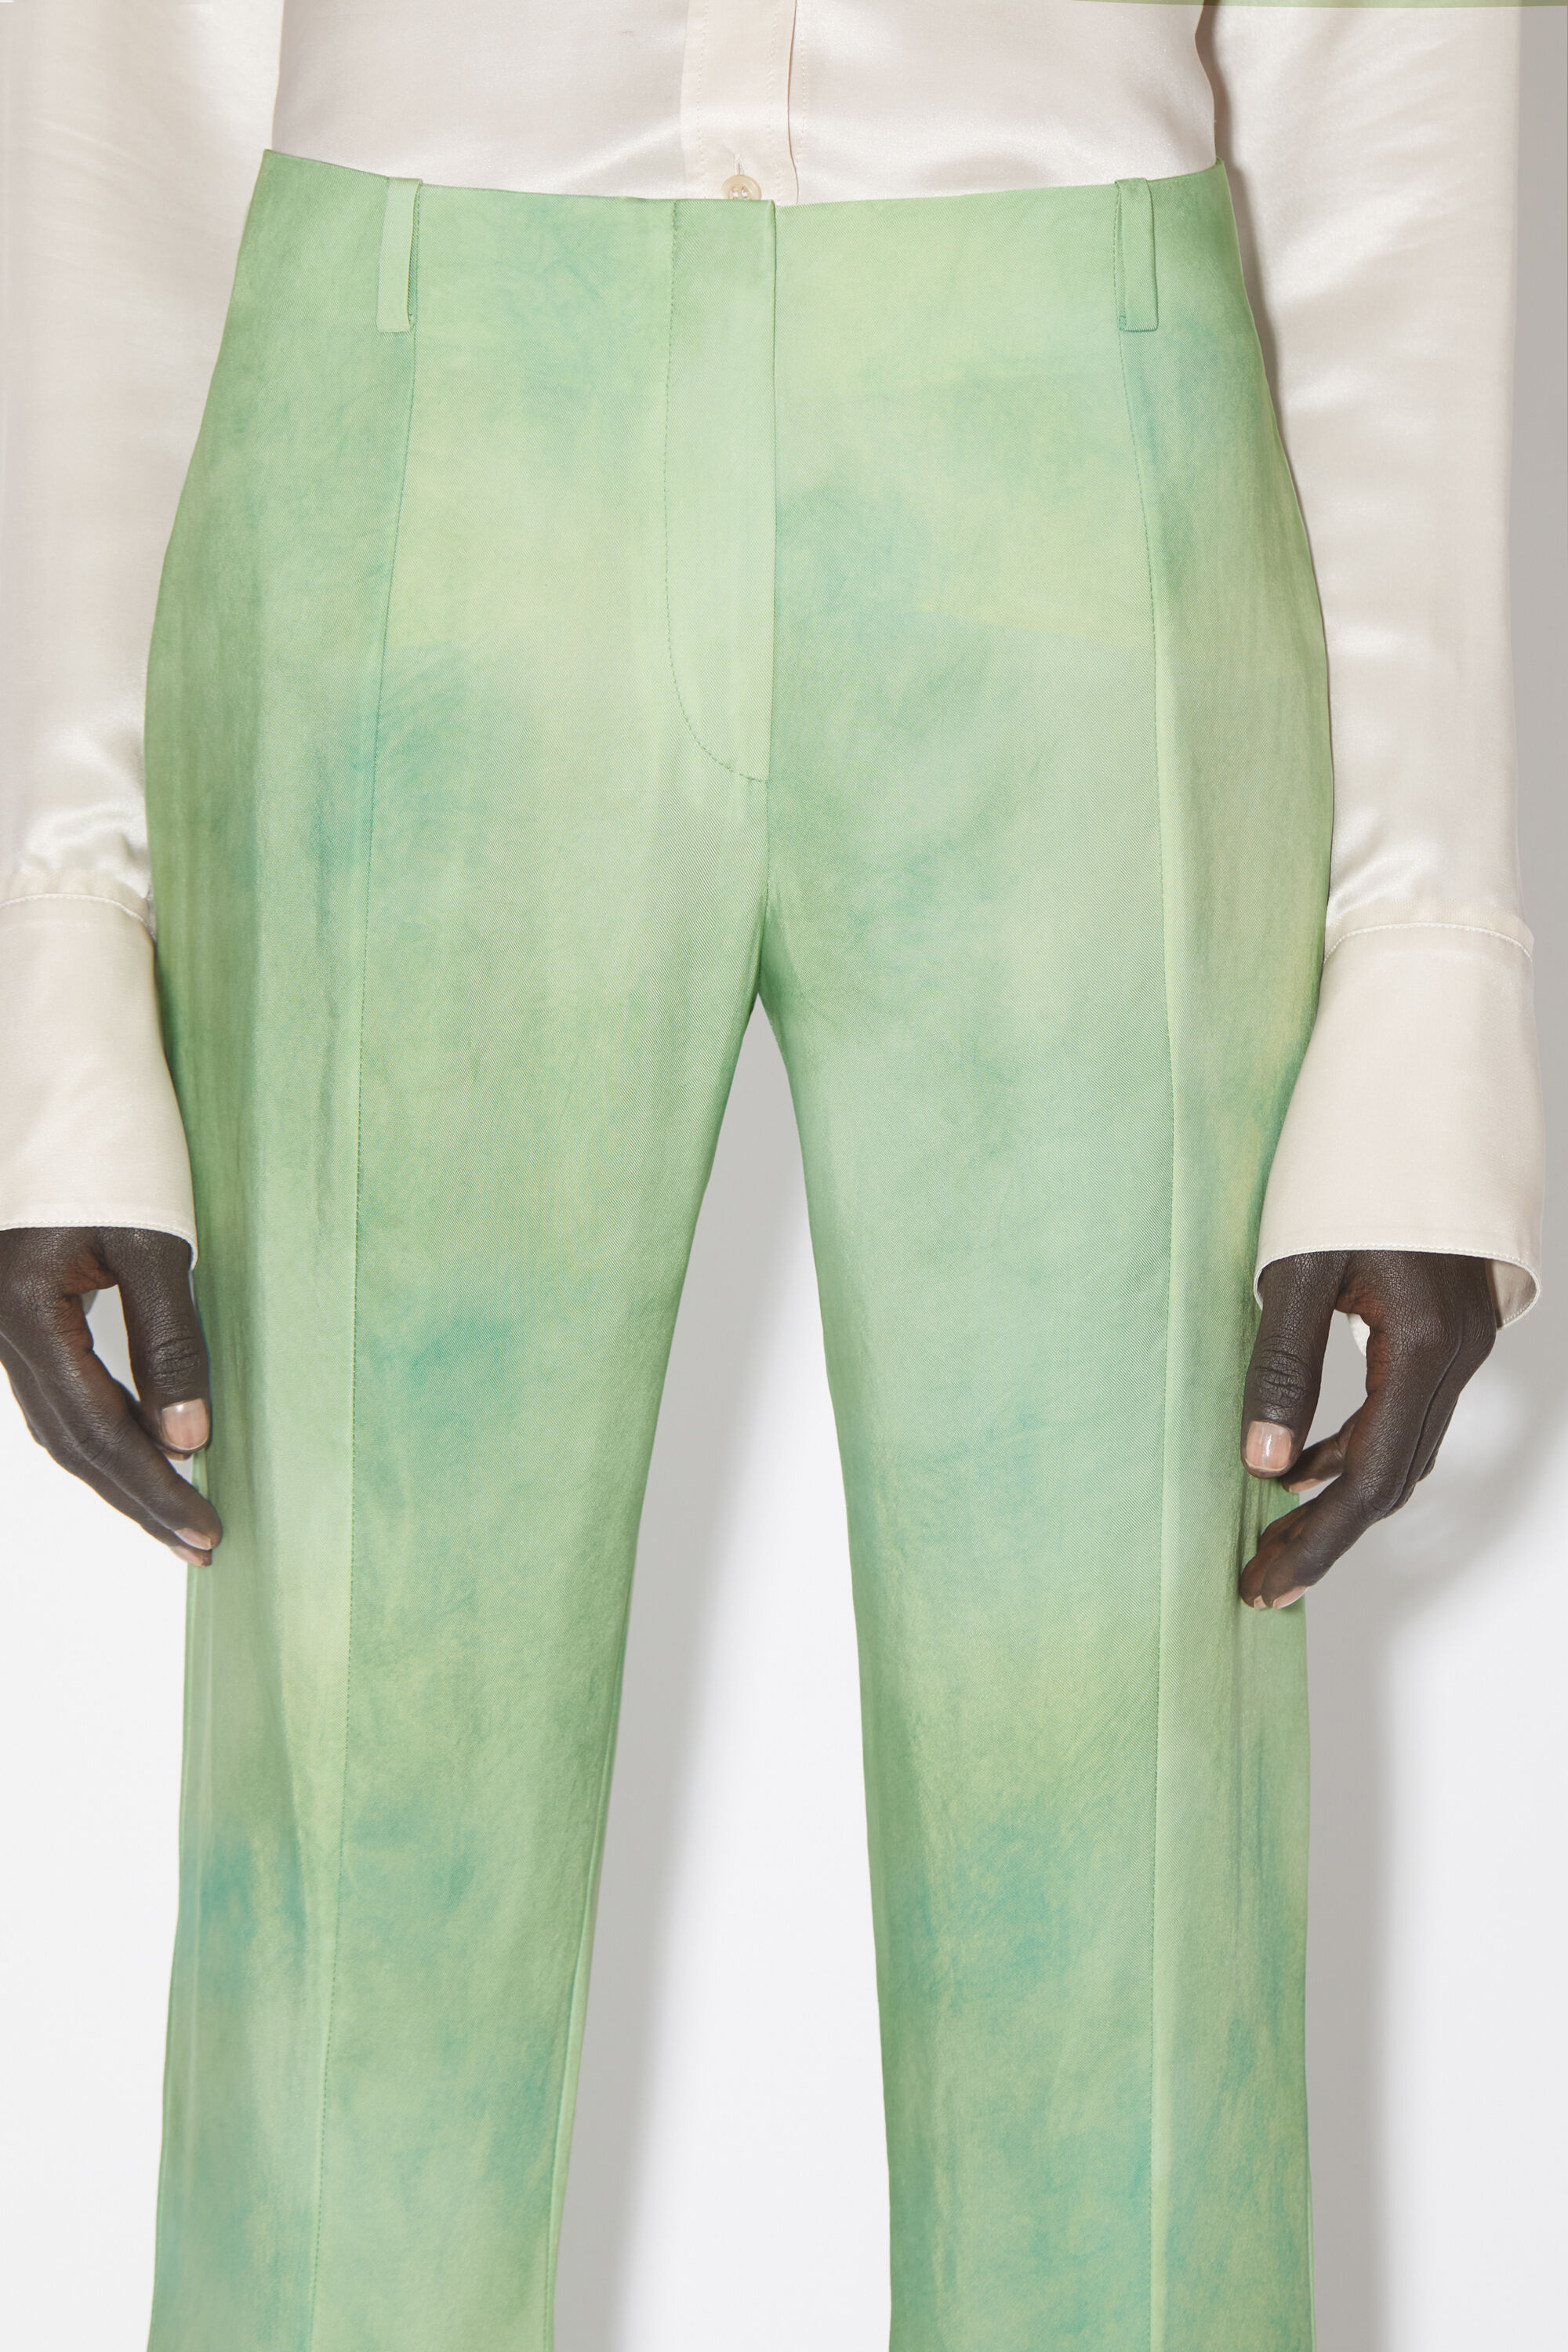 acne studios flare trousers